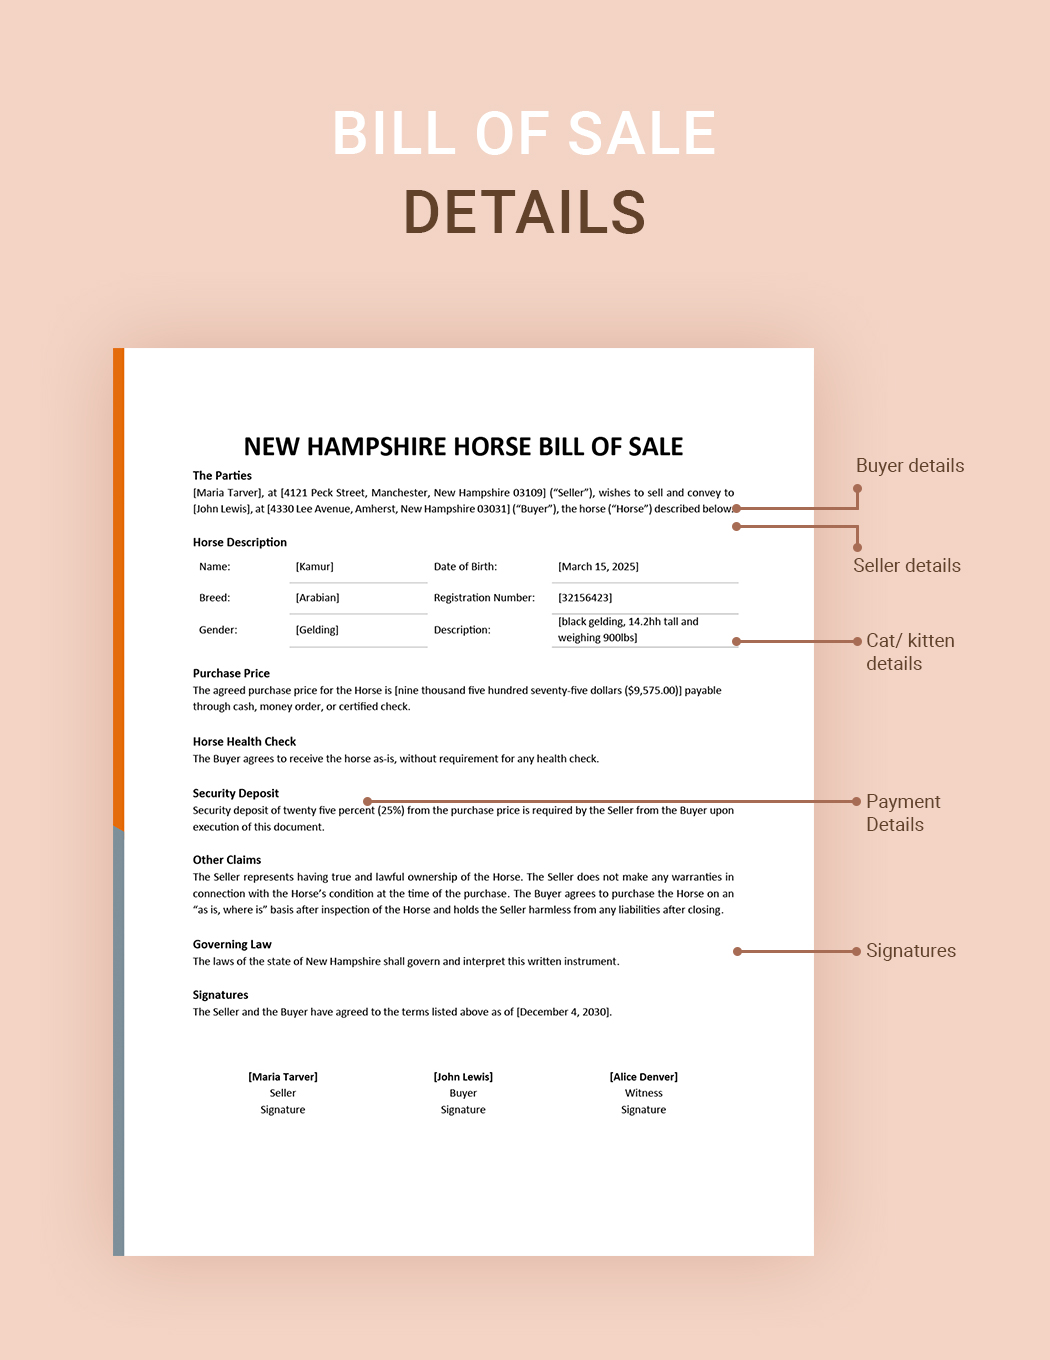 New Hampshire Horse Bill of Sale Template